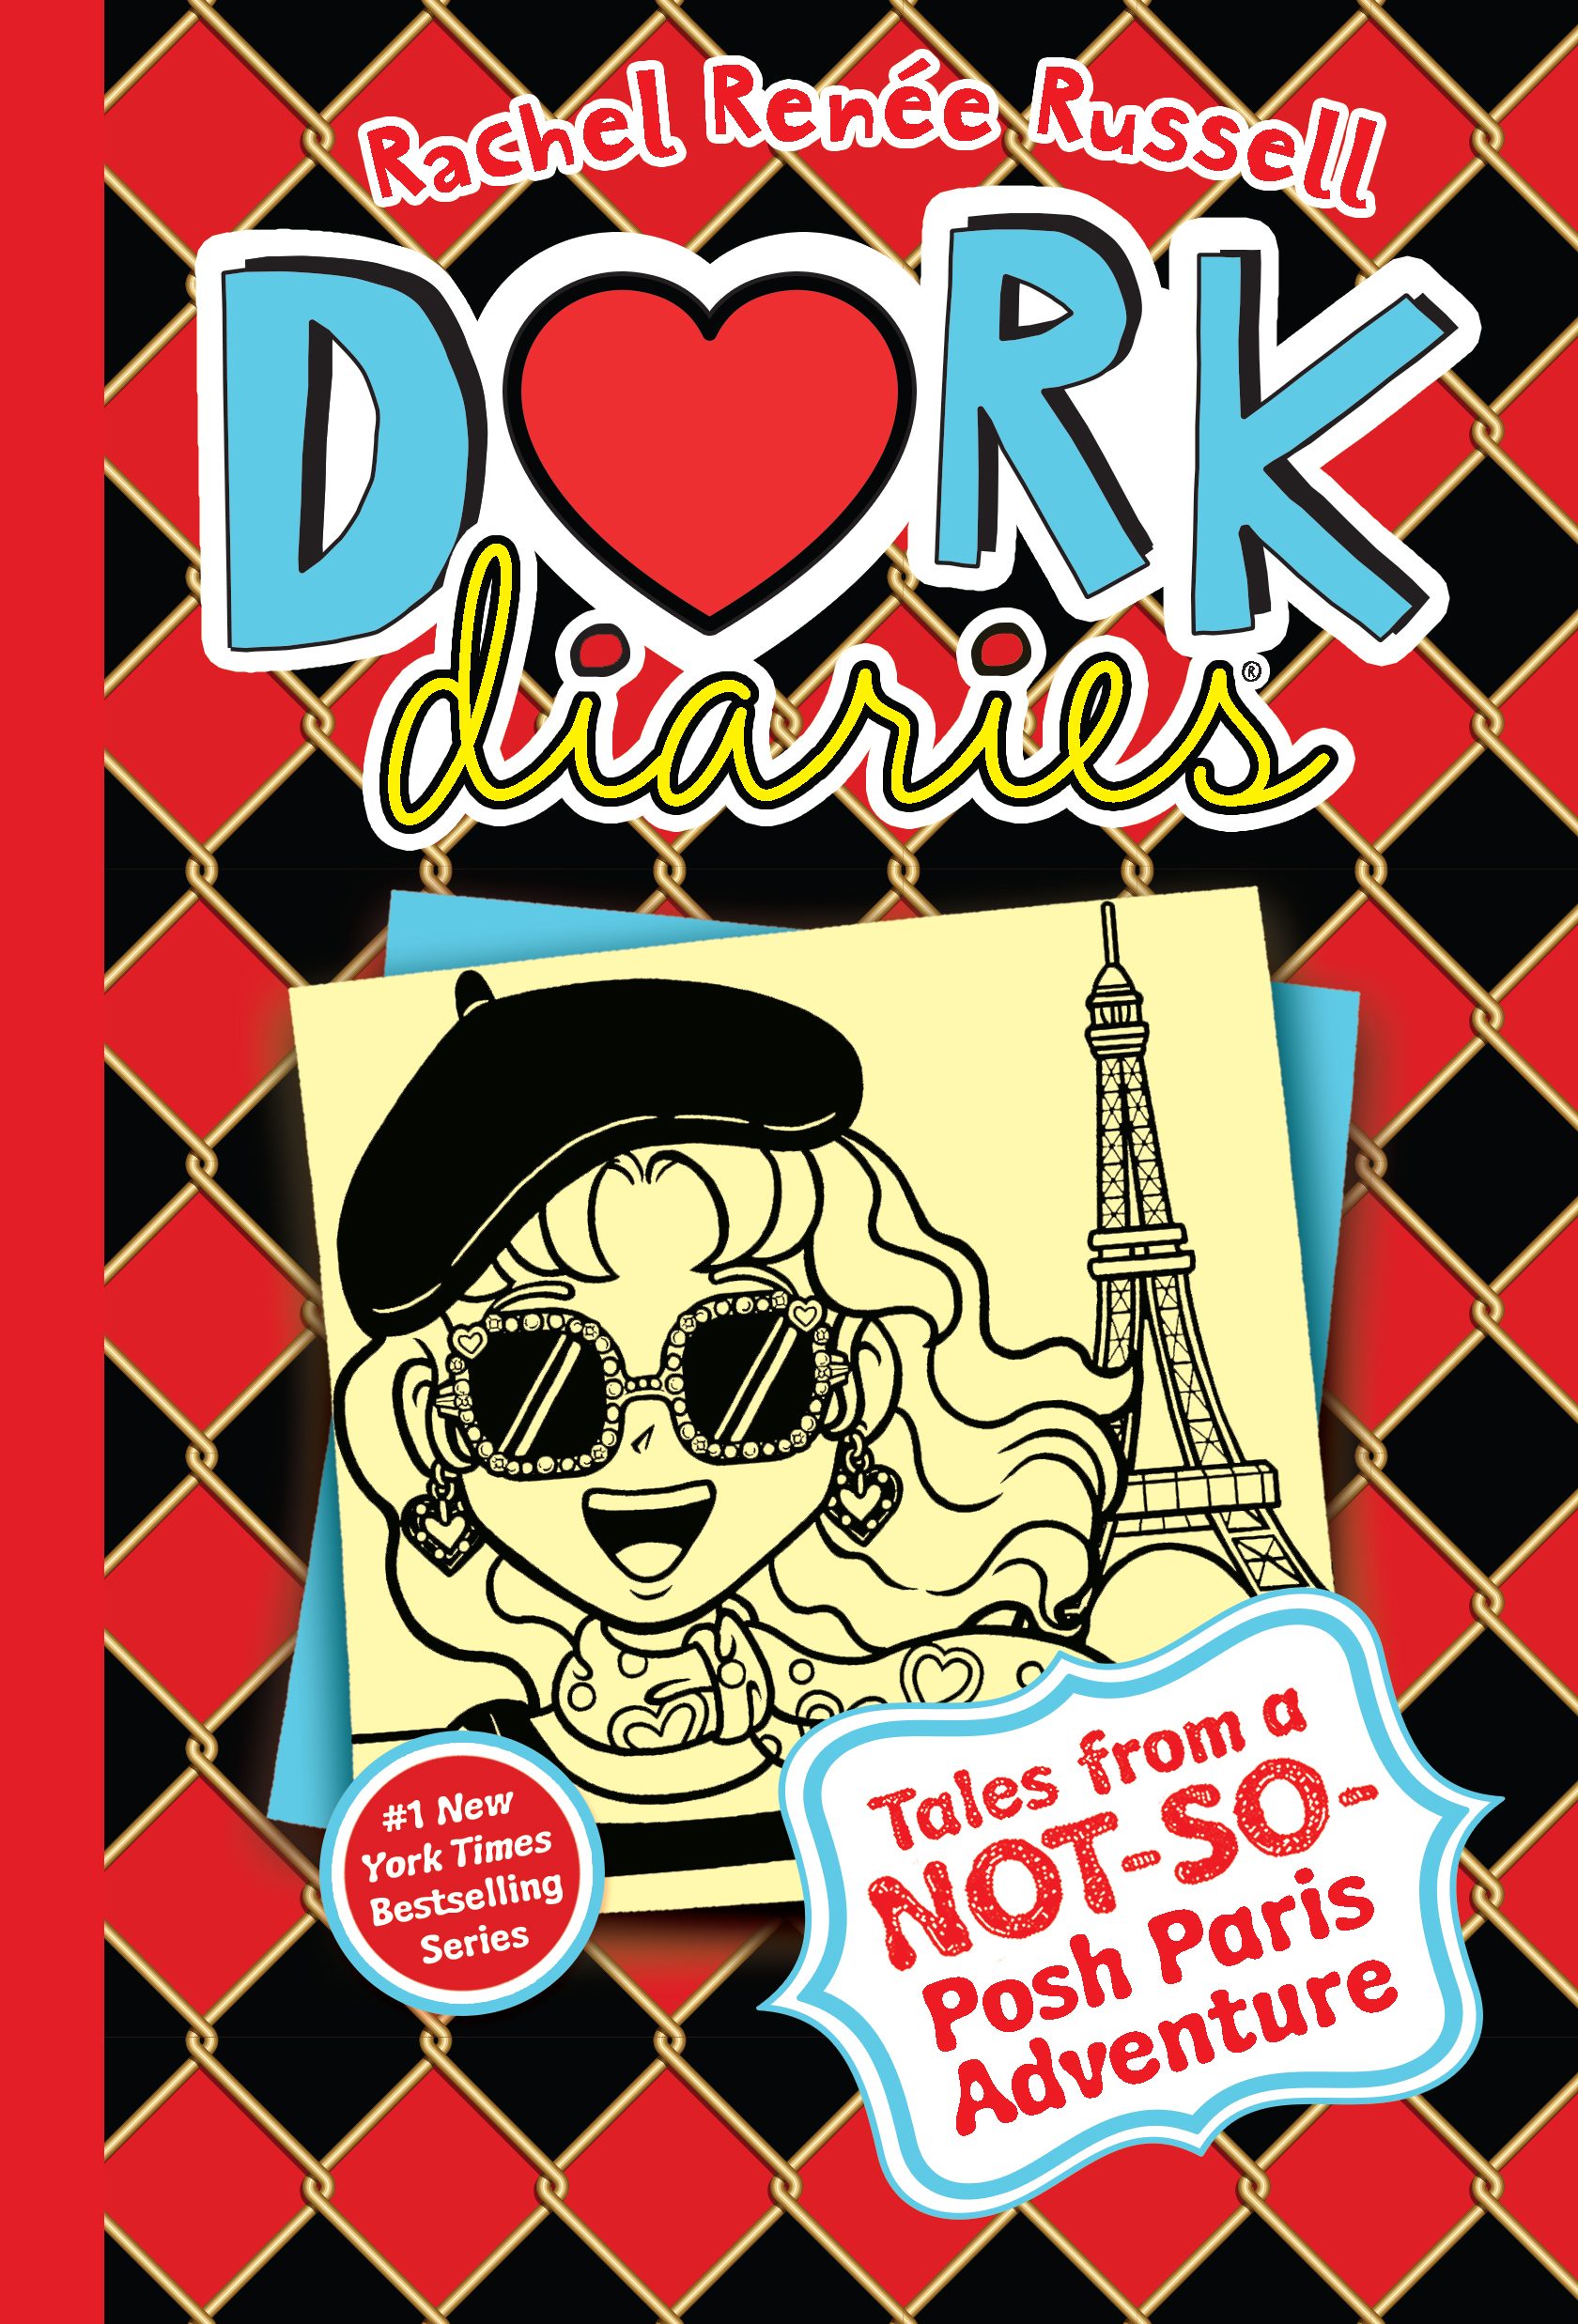 An Interview with Rachel Renée Russell, the author of Dork Diaries 15: Tales from a Not-So-Posh Paris Adventure